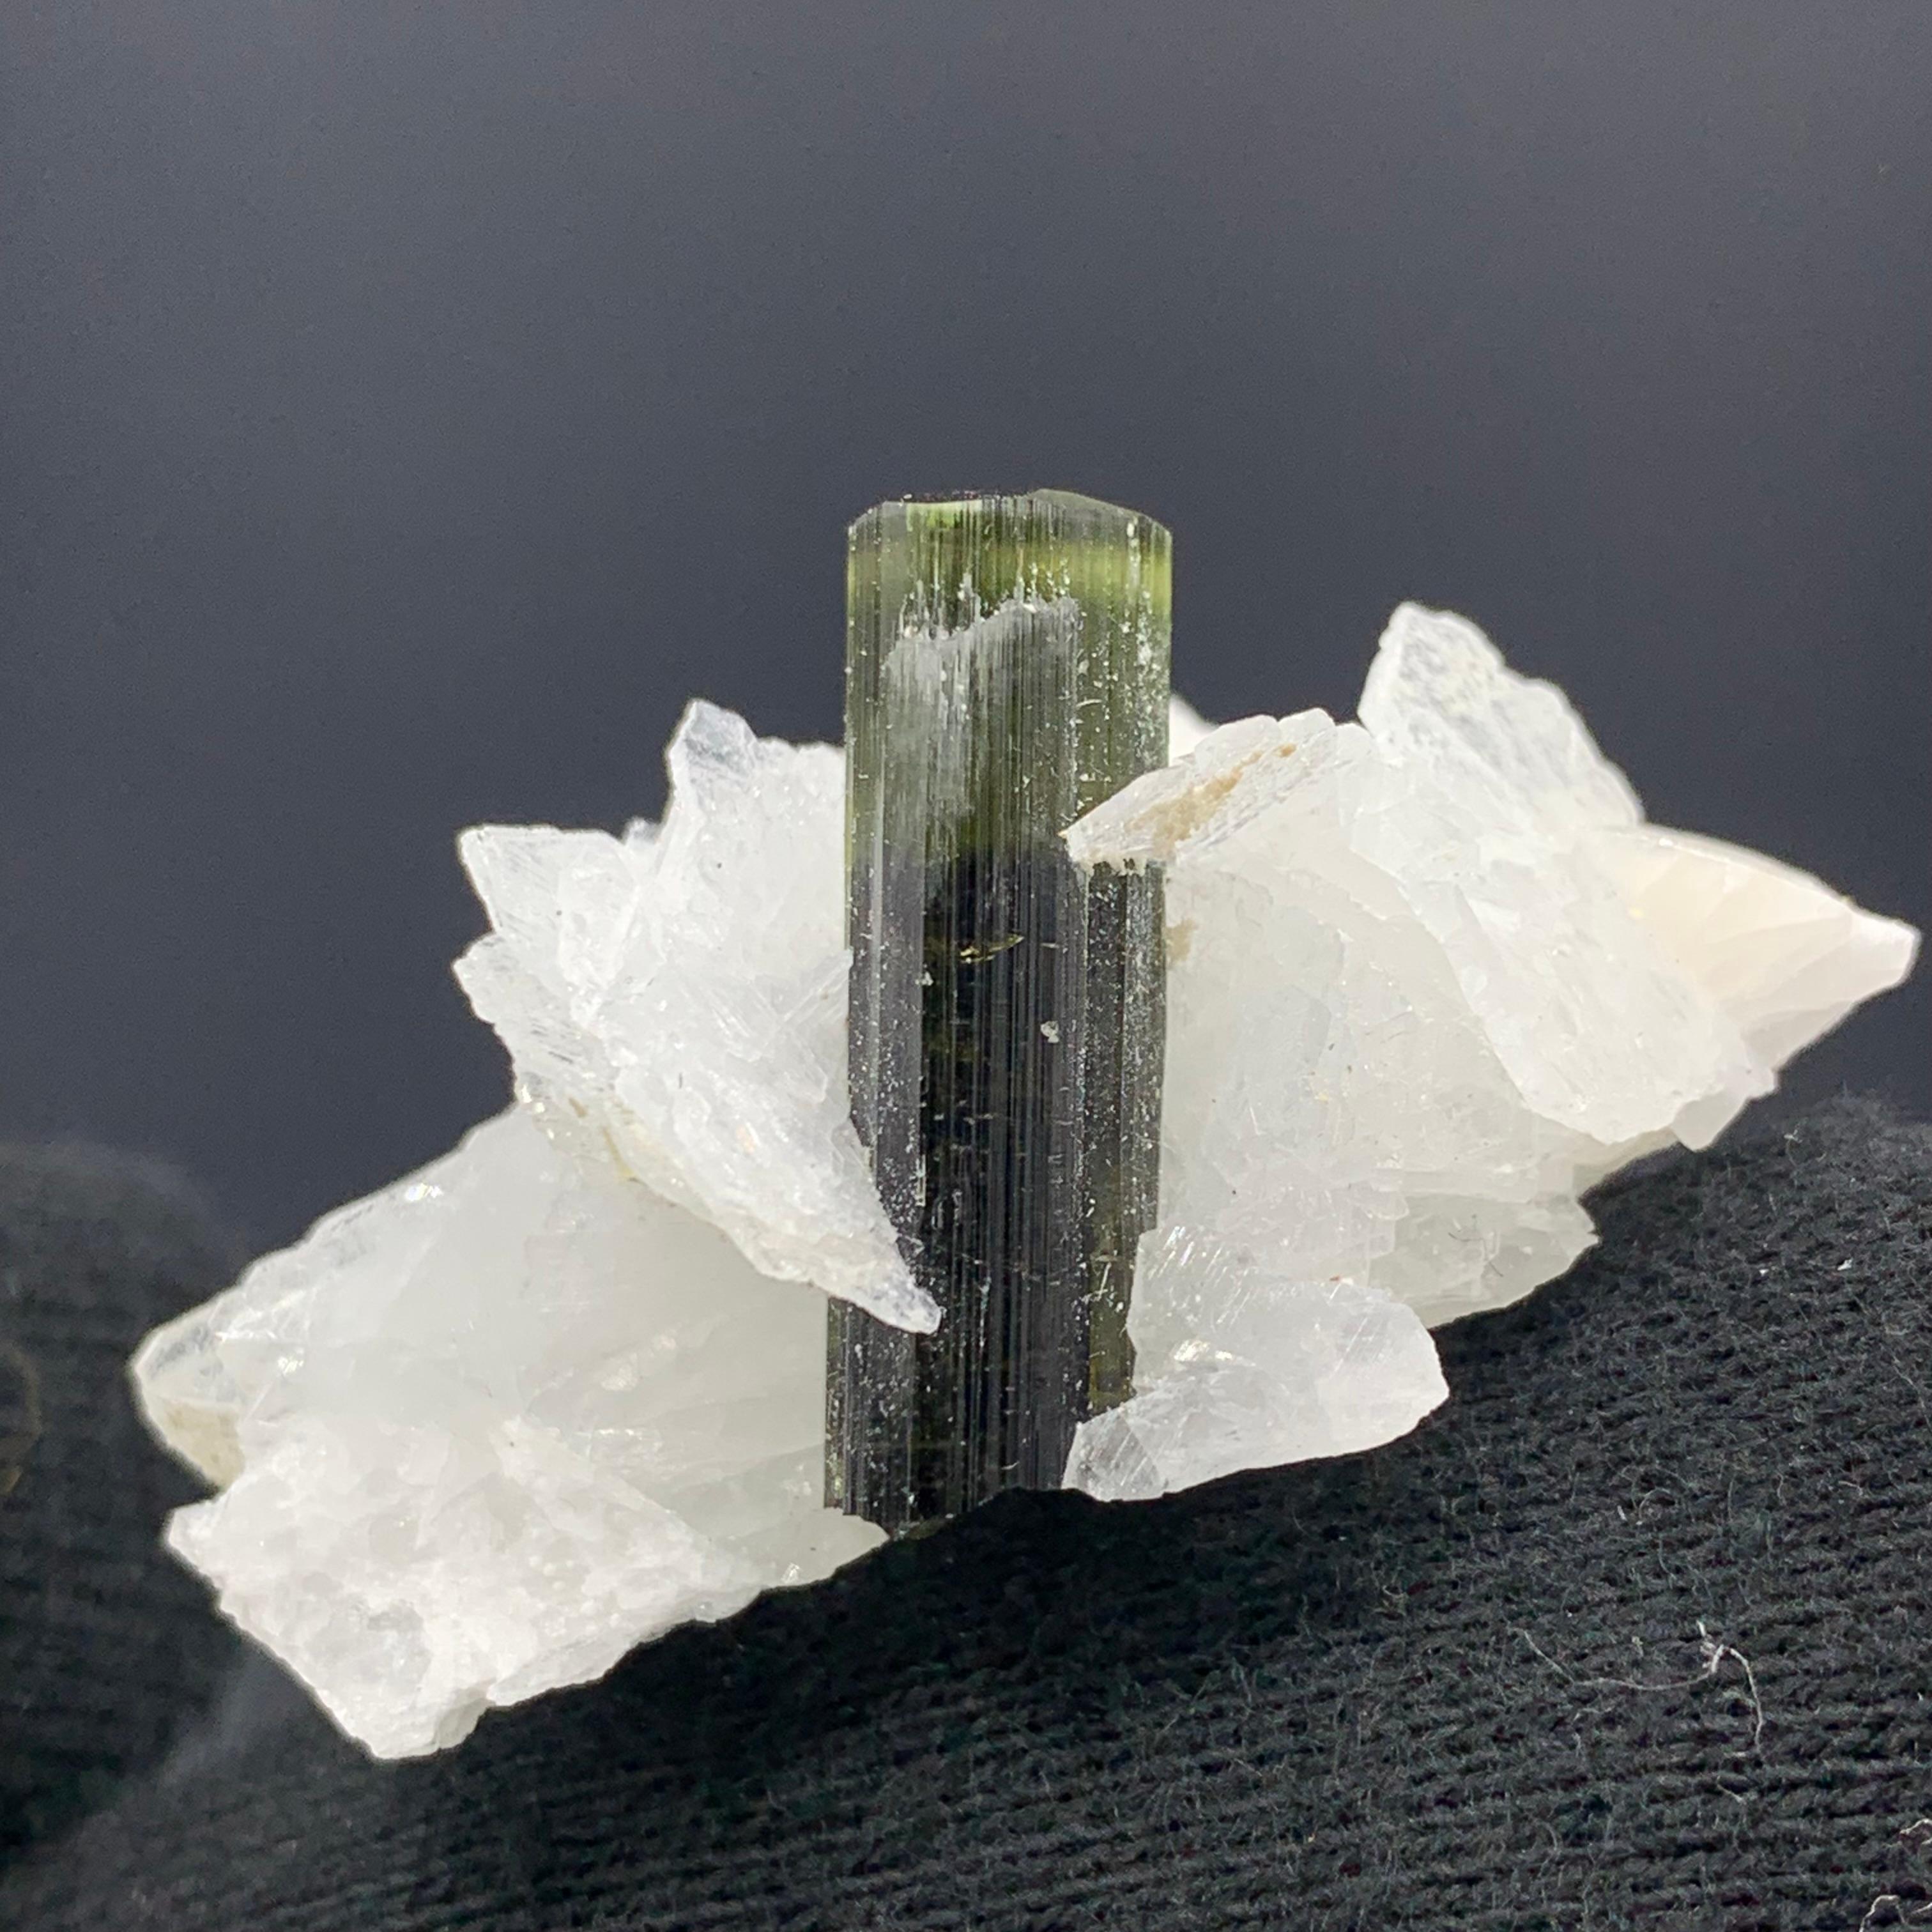 13.72 Gram Pretty Green Tourmaline Specimen With Albite From Stak Nala, Skardu, Pakistan 

Weight: 13.72 Gram
Dimension: 2.1 x 4.1 x 2.1 Cm
Origin: Stak Nala, Skardu, Pakistan 

Tourmaline is a crystalline silicate mineral group in which boron is